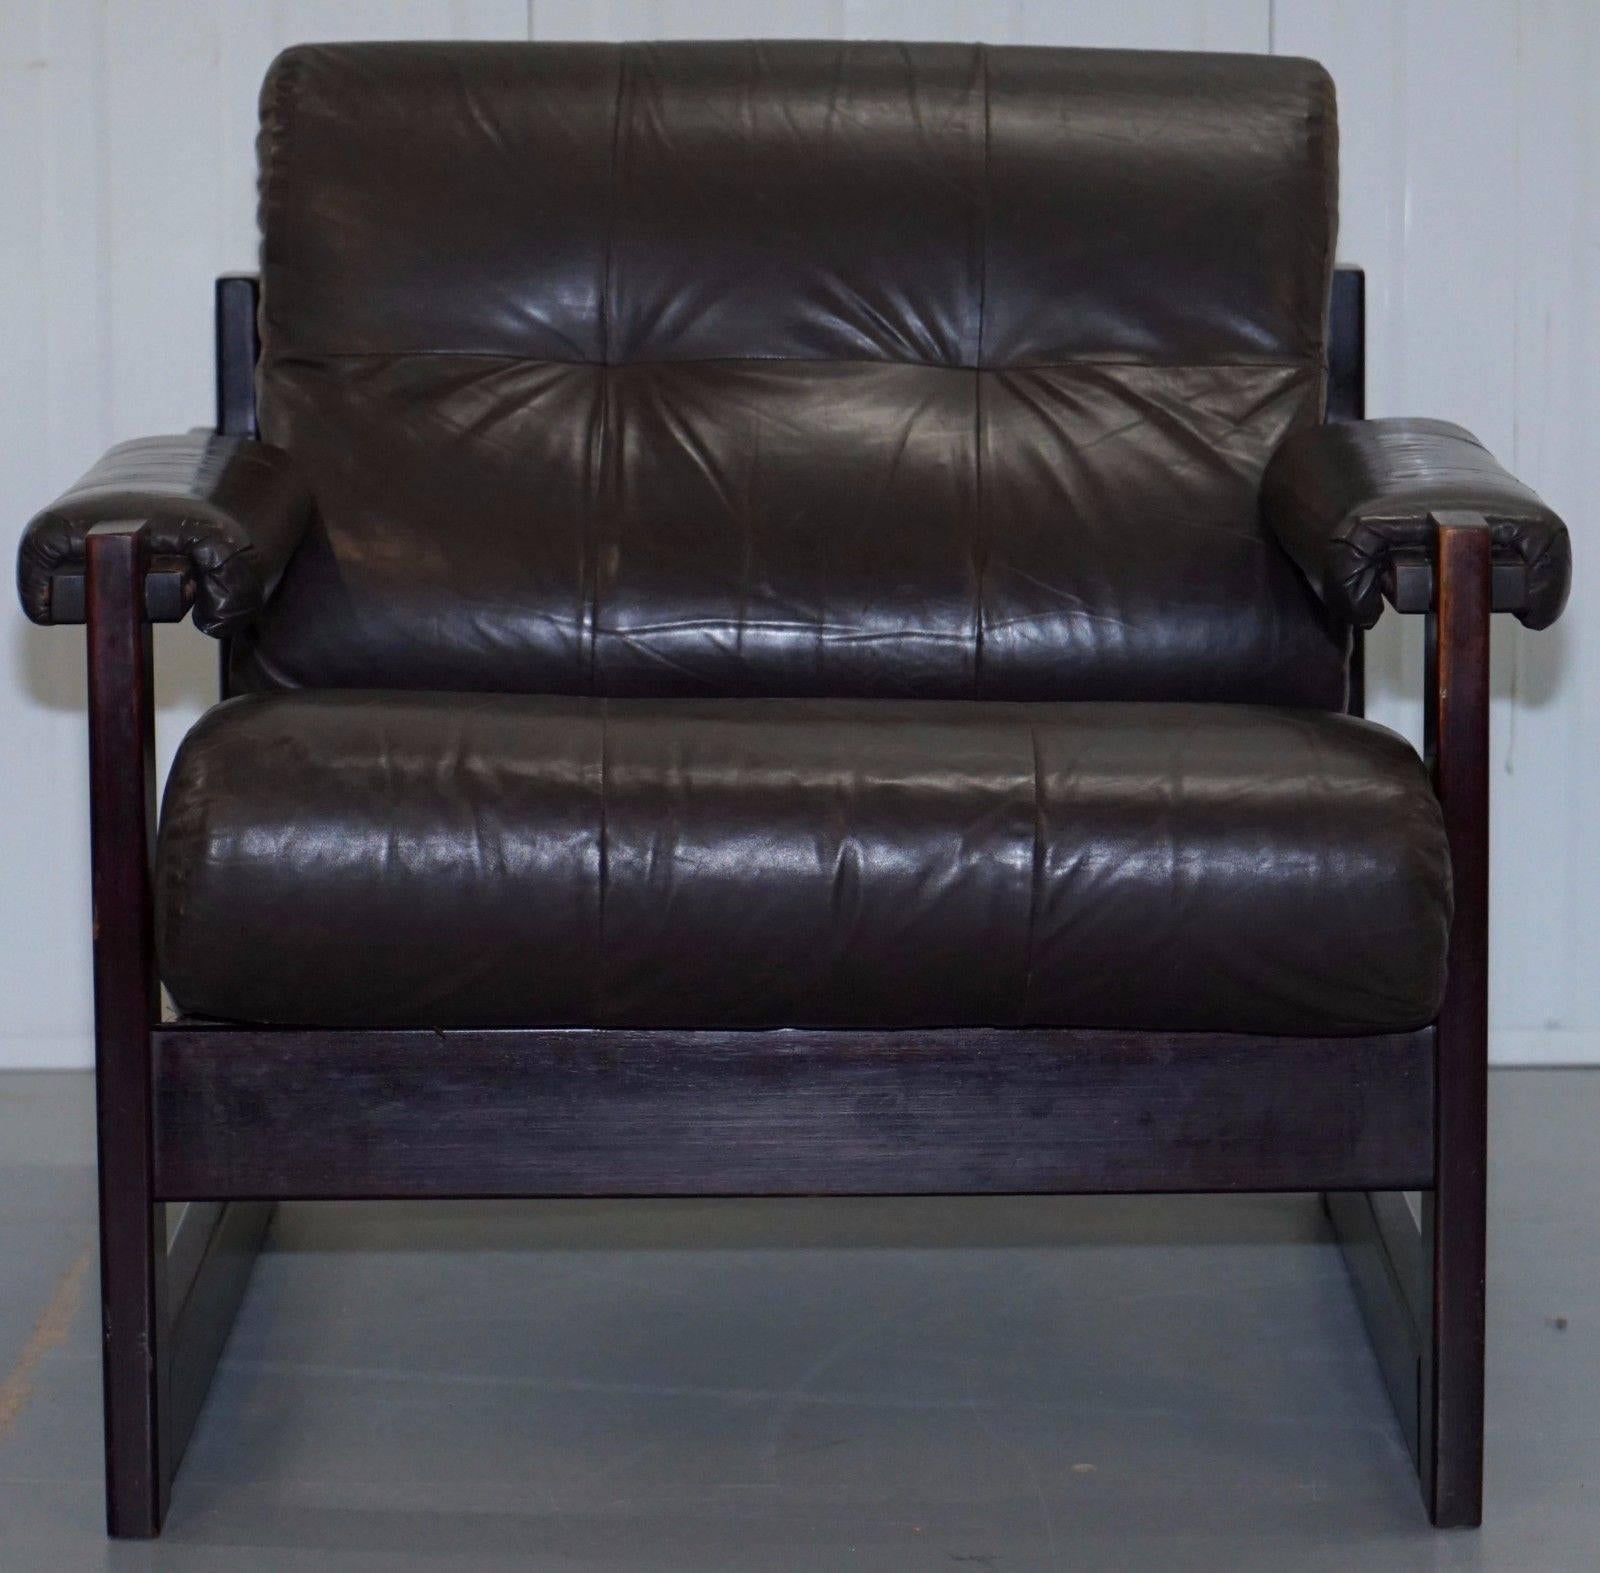 Wimbledon-Furniture

We are delighted to offer for sale this stunning pair of Brazilian wood 1975 Percavil Lafer S1 Jacaranda brown leather sling armchairs

Please note the delivery fee listed is just a guide, for an accurate quote please send me